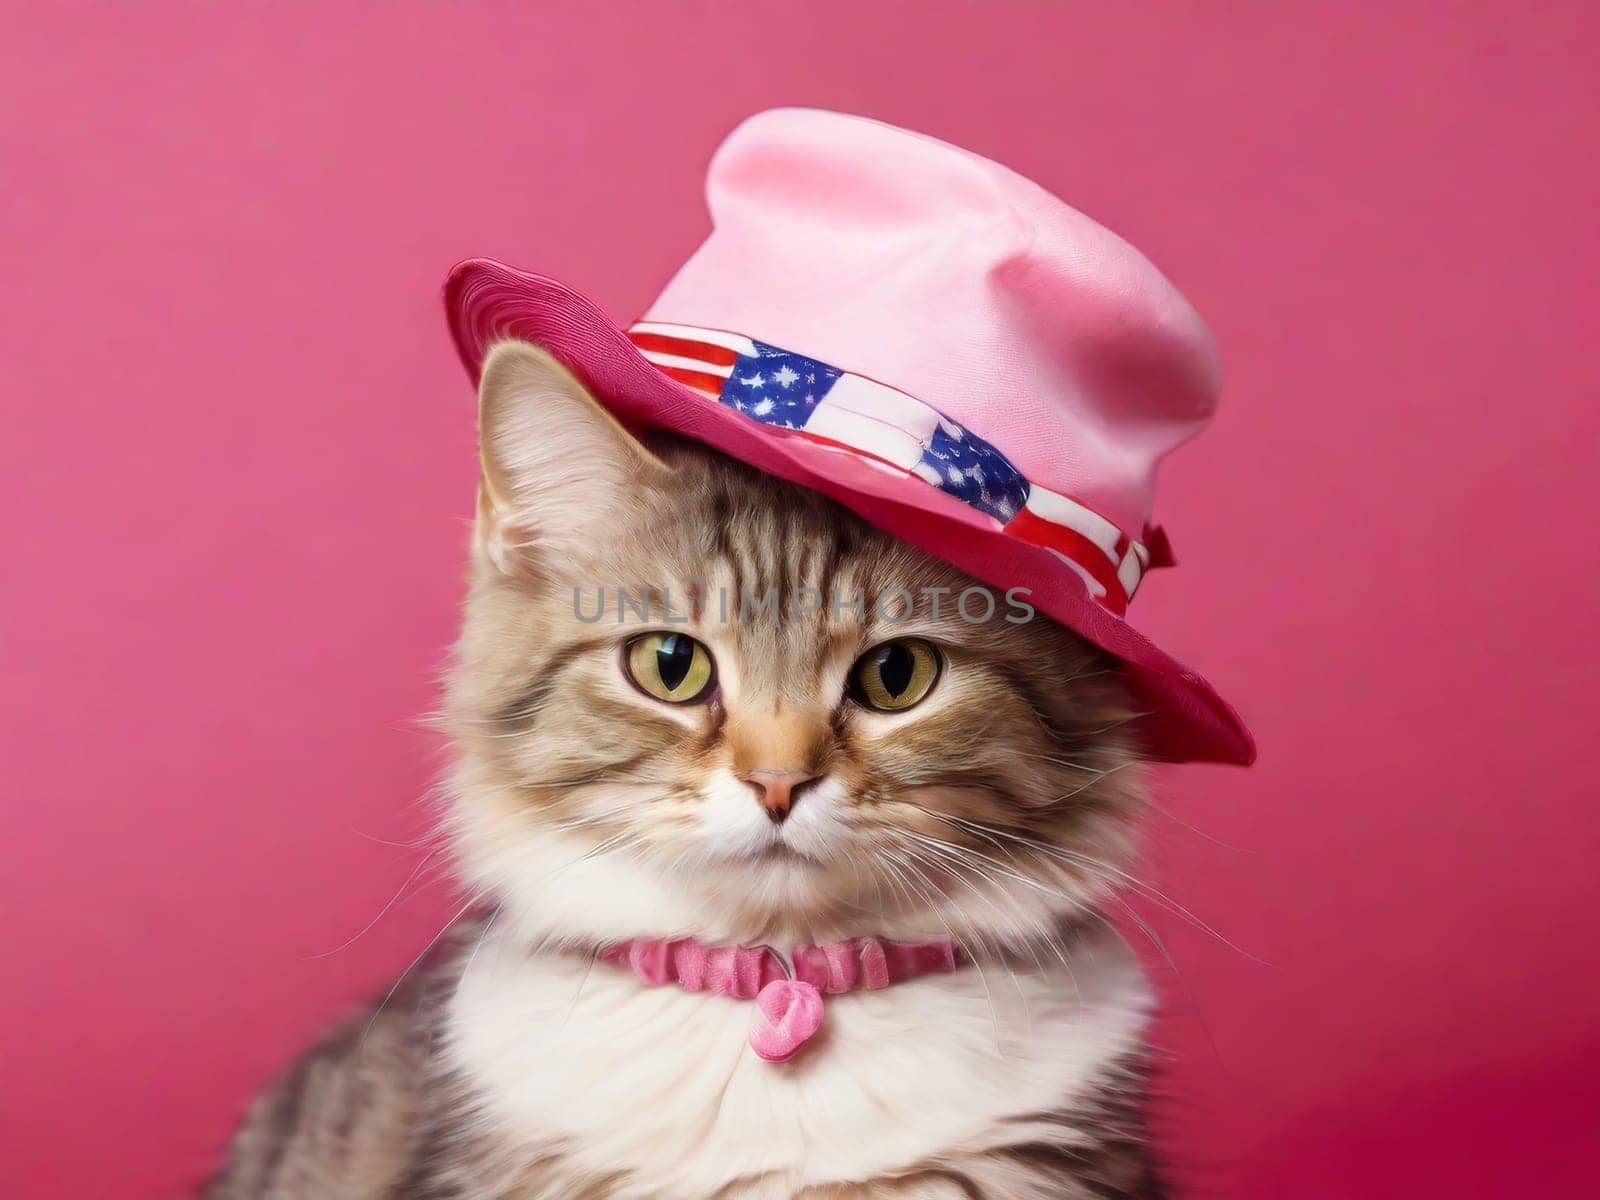 Glamorous cat wearing a hat in the color of the US flag on a pink background